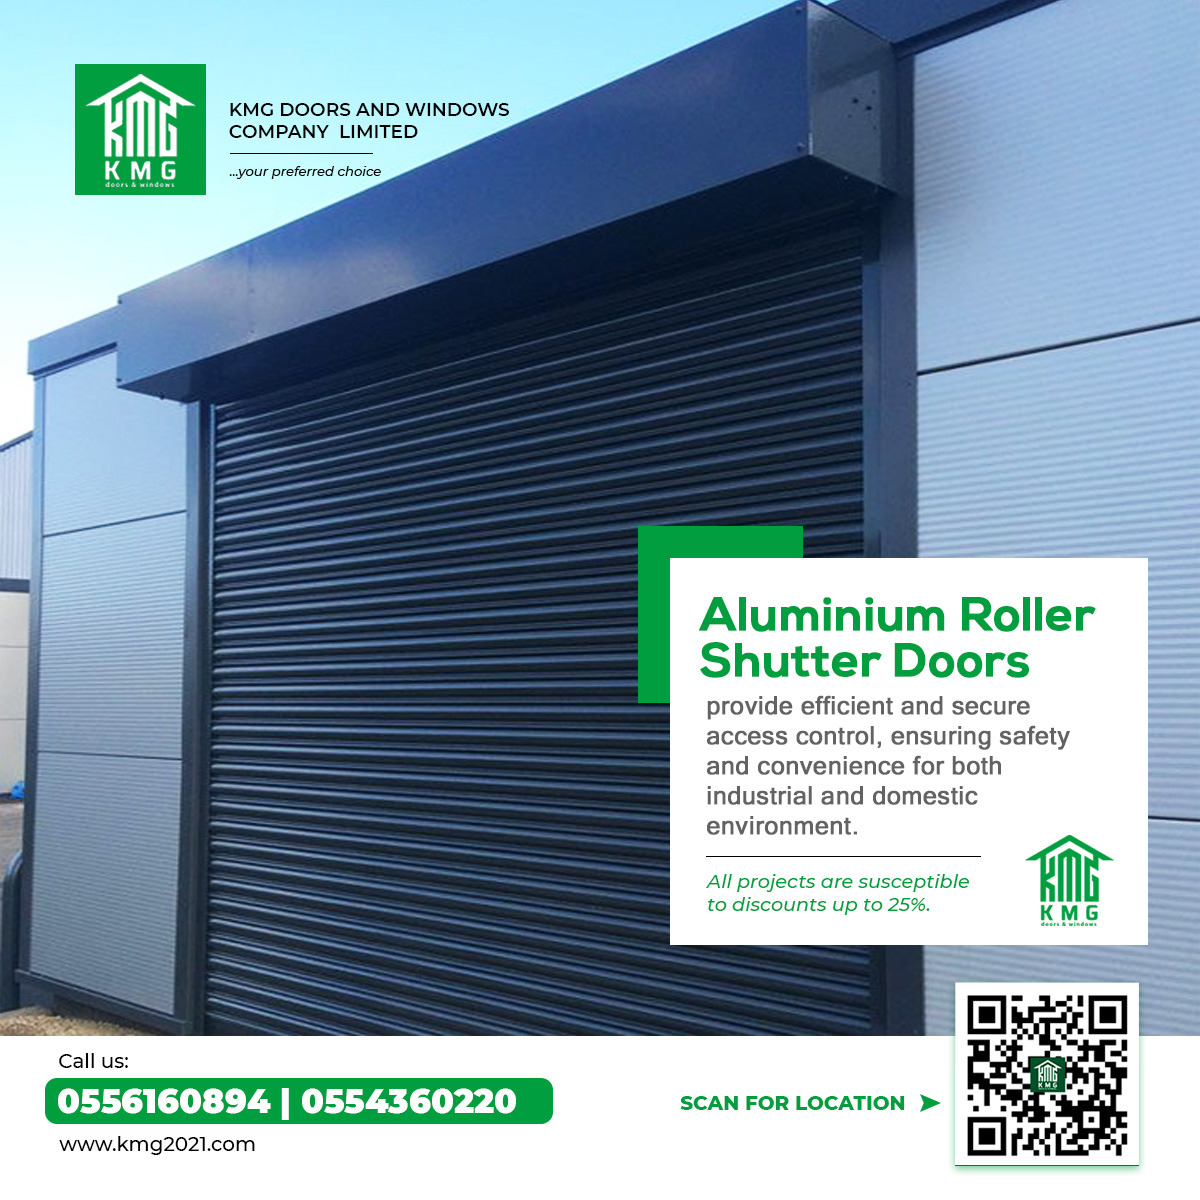 We give elegant touch to your home with smashing glass and aluminum fabrications.
We are open for business,
Contact us on 0556160894/0552468227 for all your building project.
#rollershutters #rollershutter #garagedoors #doors #rollerblinds #windows #garage #rollershutterdoor